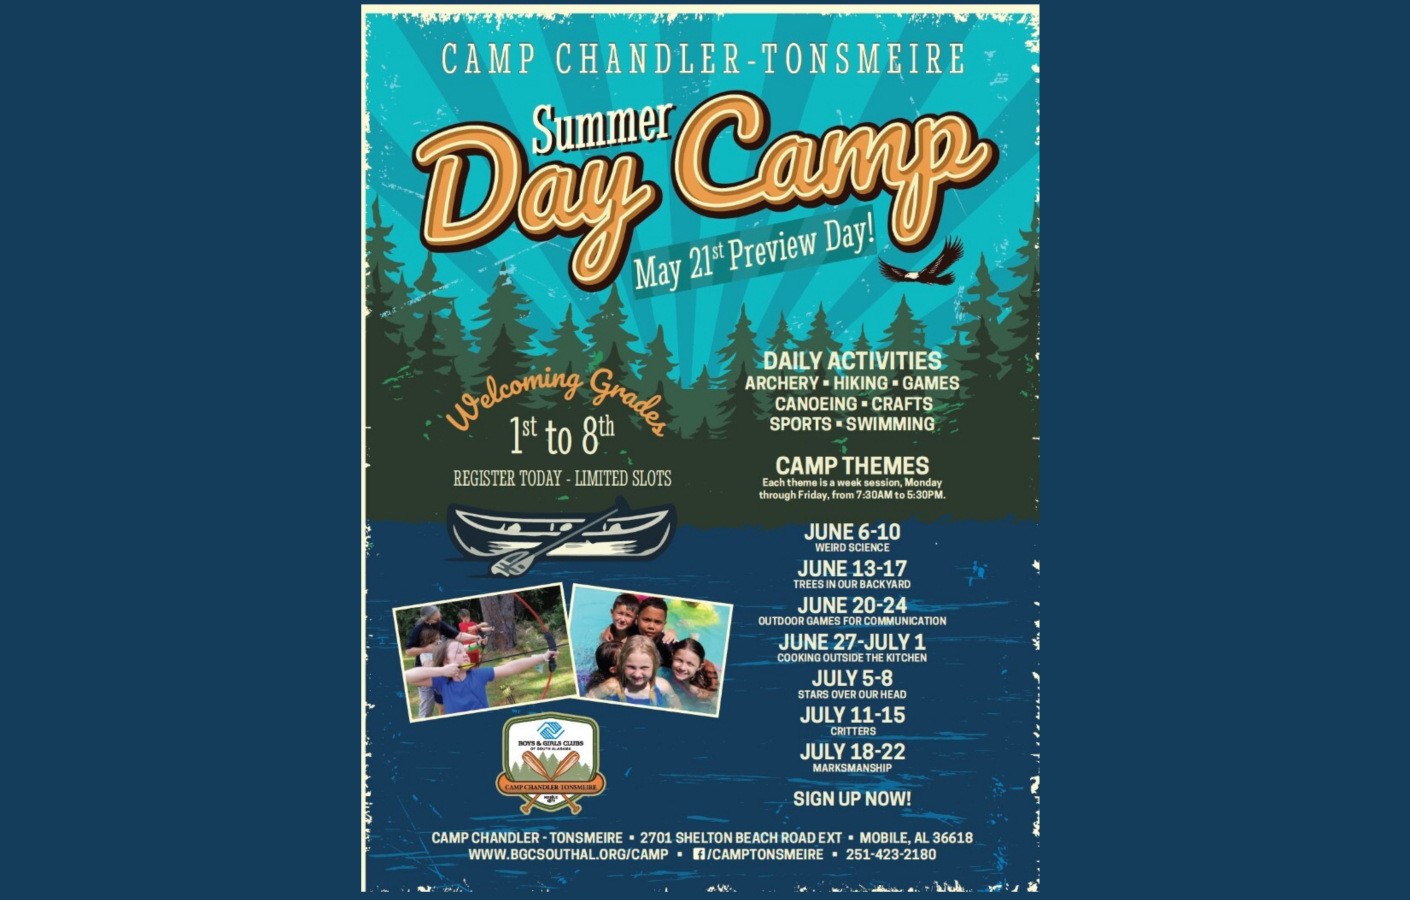 CAMP CHANDLERTONSMEIRE SUMMER DAY CAMP PREVIEW DAY